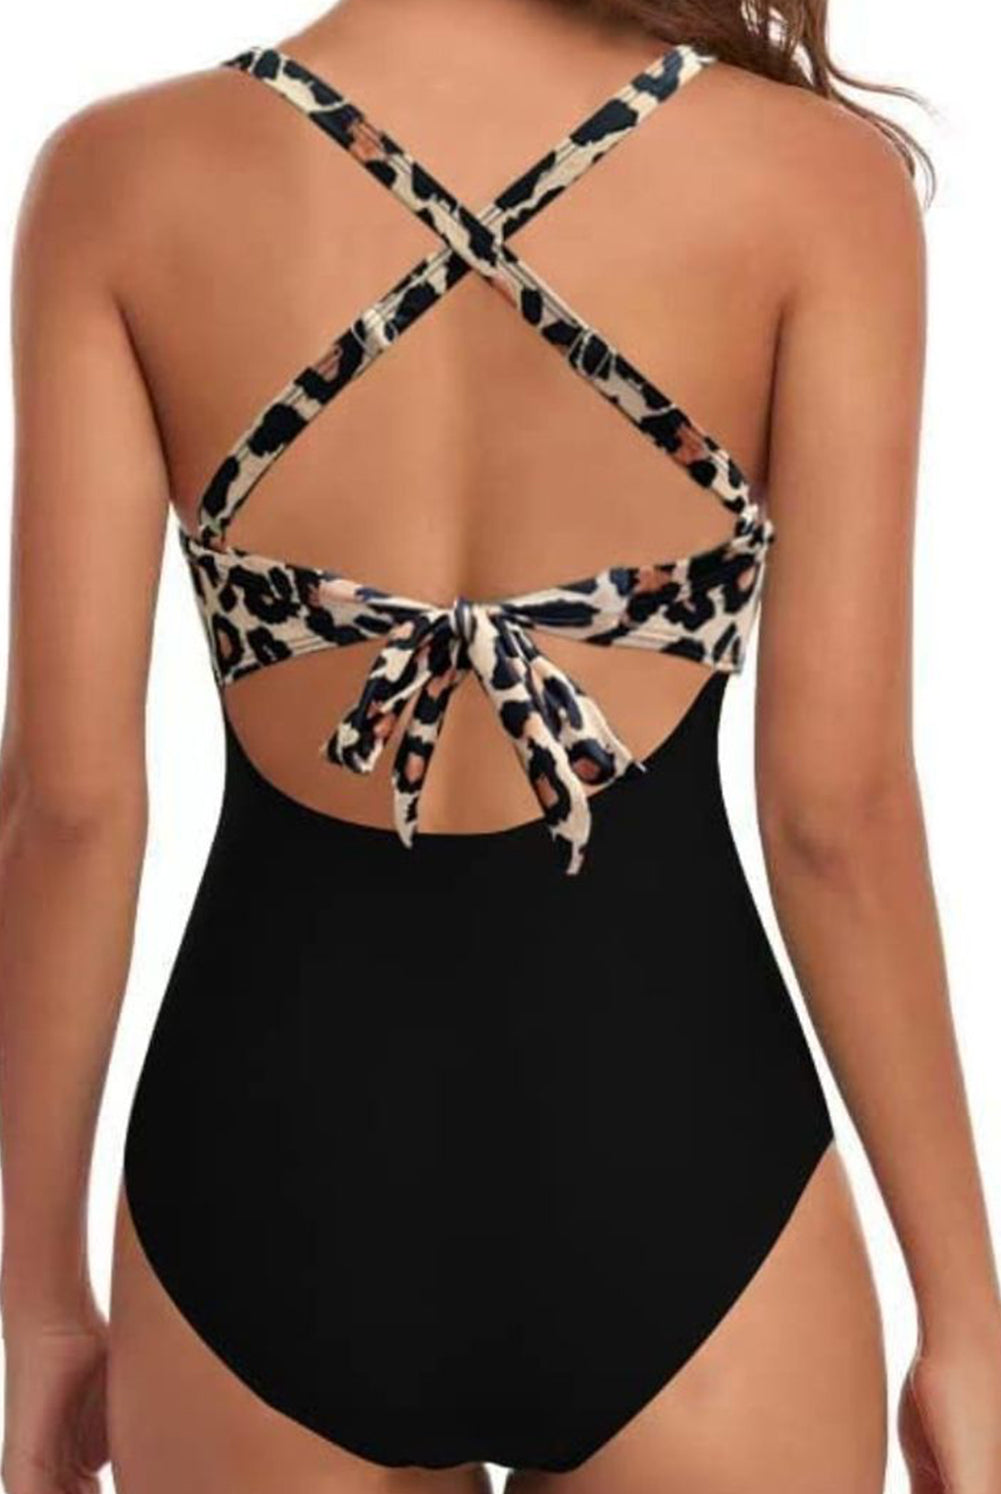 Woman in pink one-piece swimsuit with crisscross design and cutout, a stylish swimwear choice.